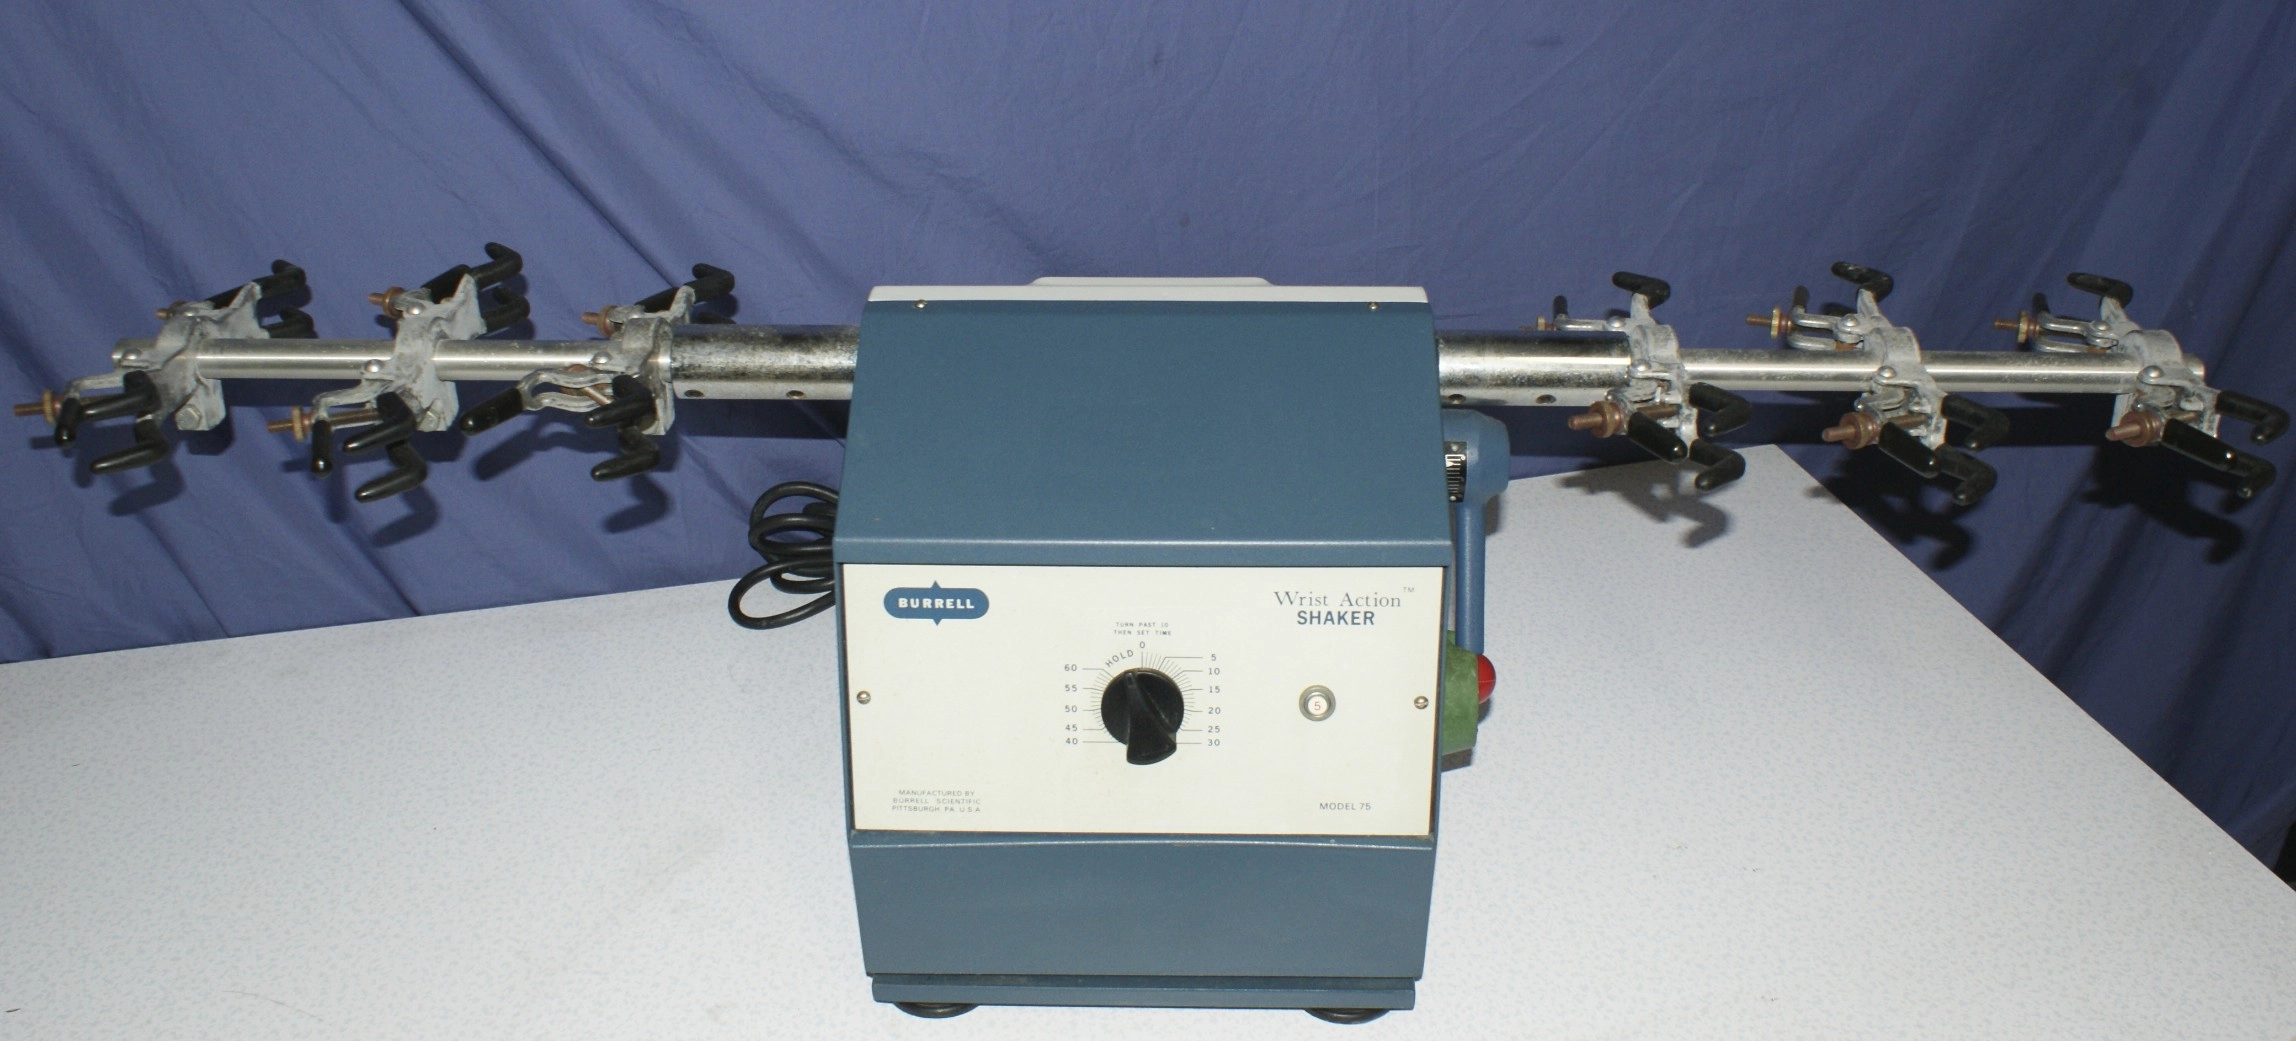 Burrell Model 75 Wrist Action Shaker Burrell Wrist Action Shaker with two arms with clamps